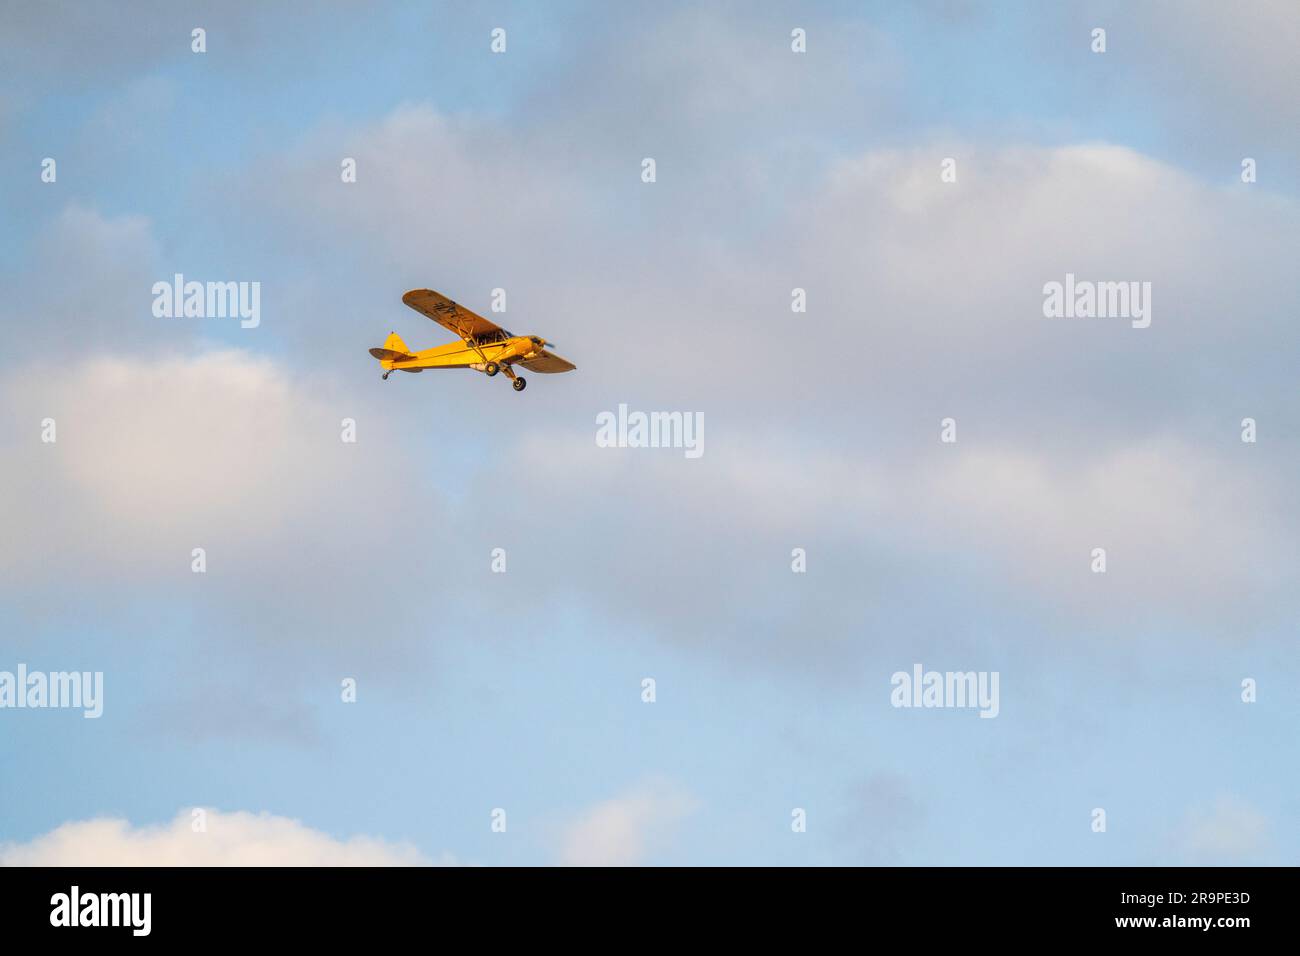 Yellow Cessna flying over, backdrop blue sky with white clouds. Rhino protection, poaching. Namibia, Africa Stock Photo